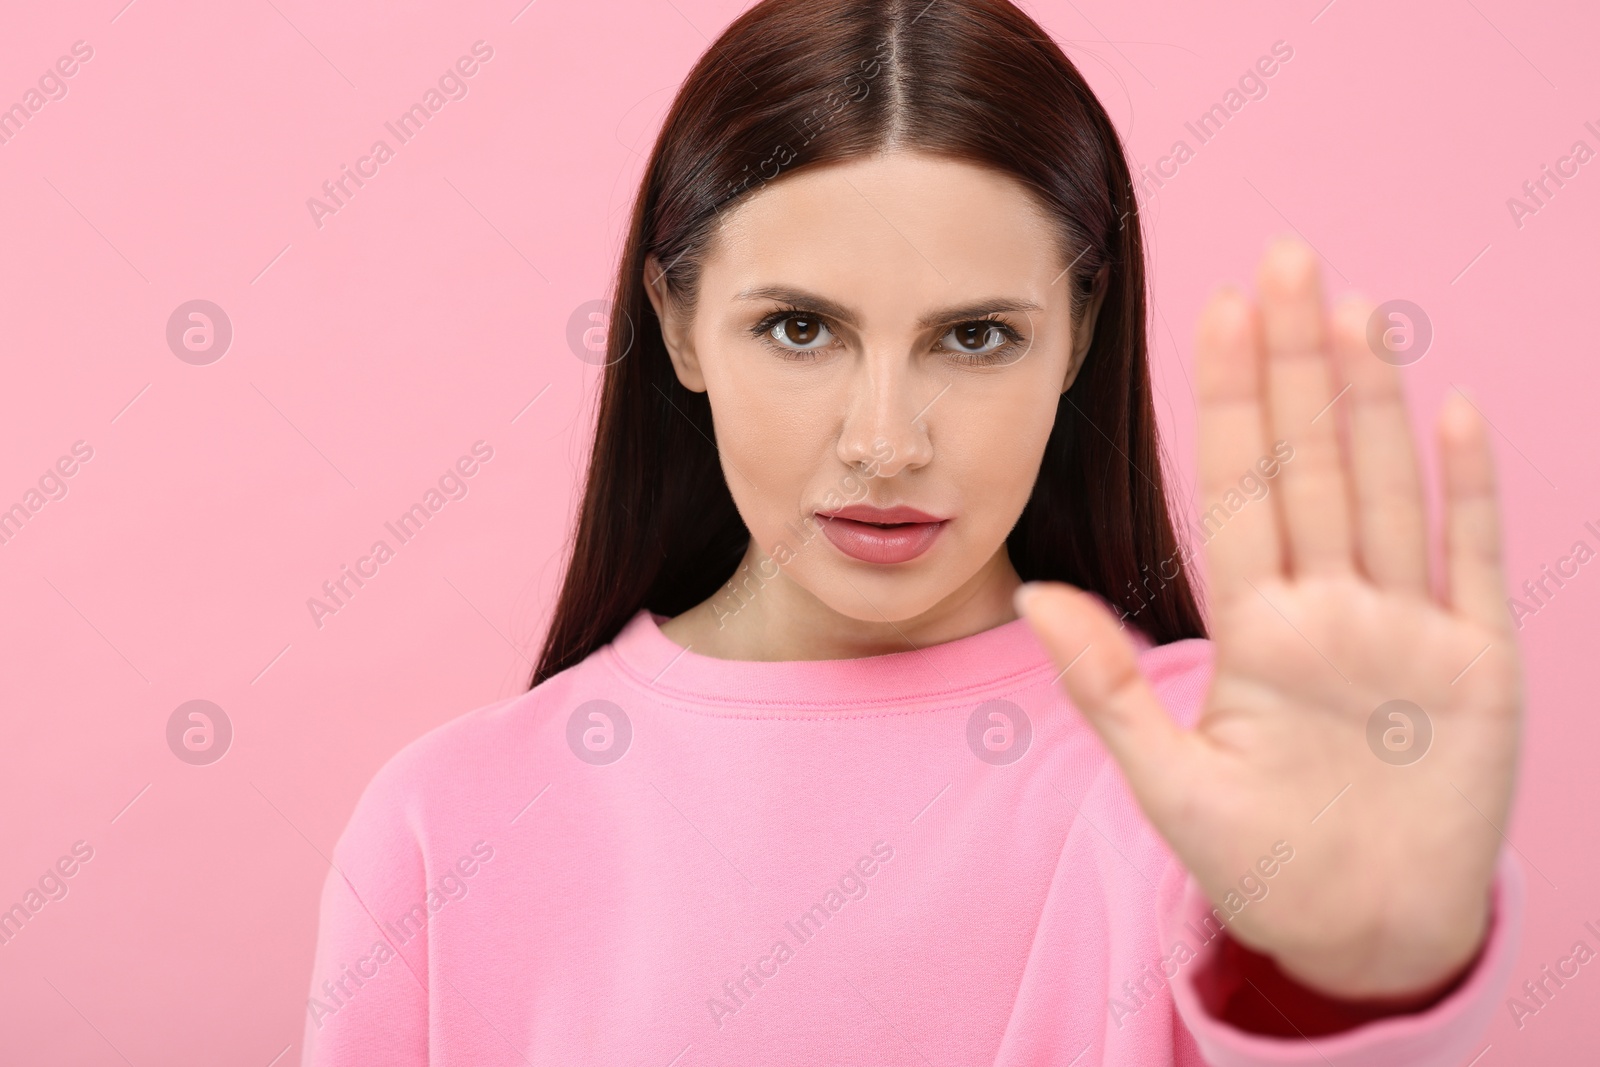 Photo of Woman showing stop gesture on pink background, selective focus